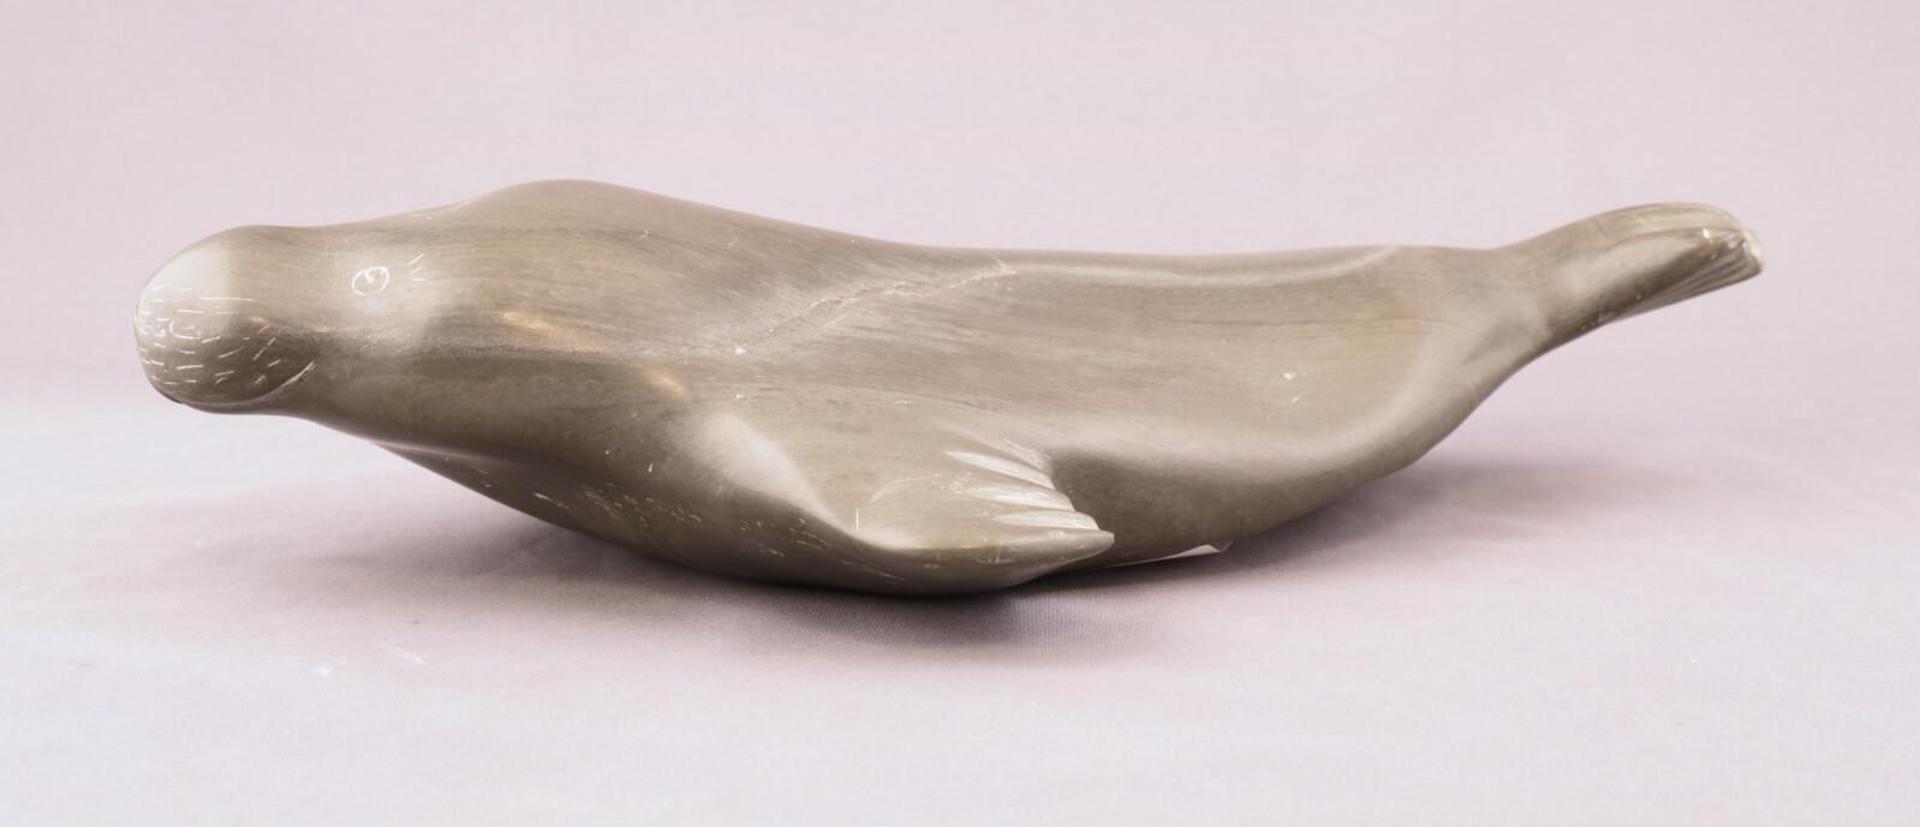 Emily Takatak (1932) - a marbled grey stone carving of a Swimming Seal